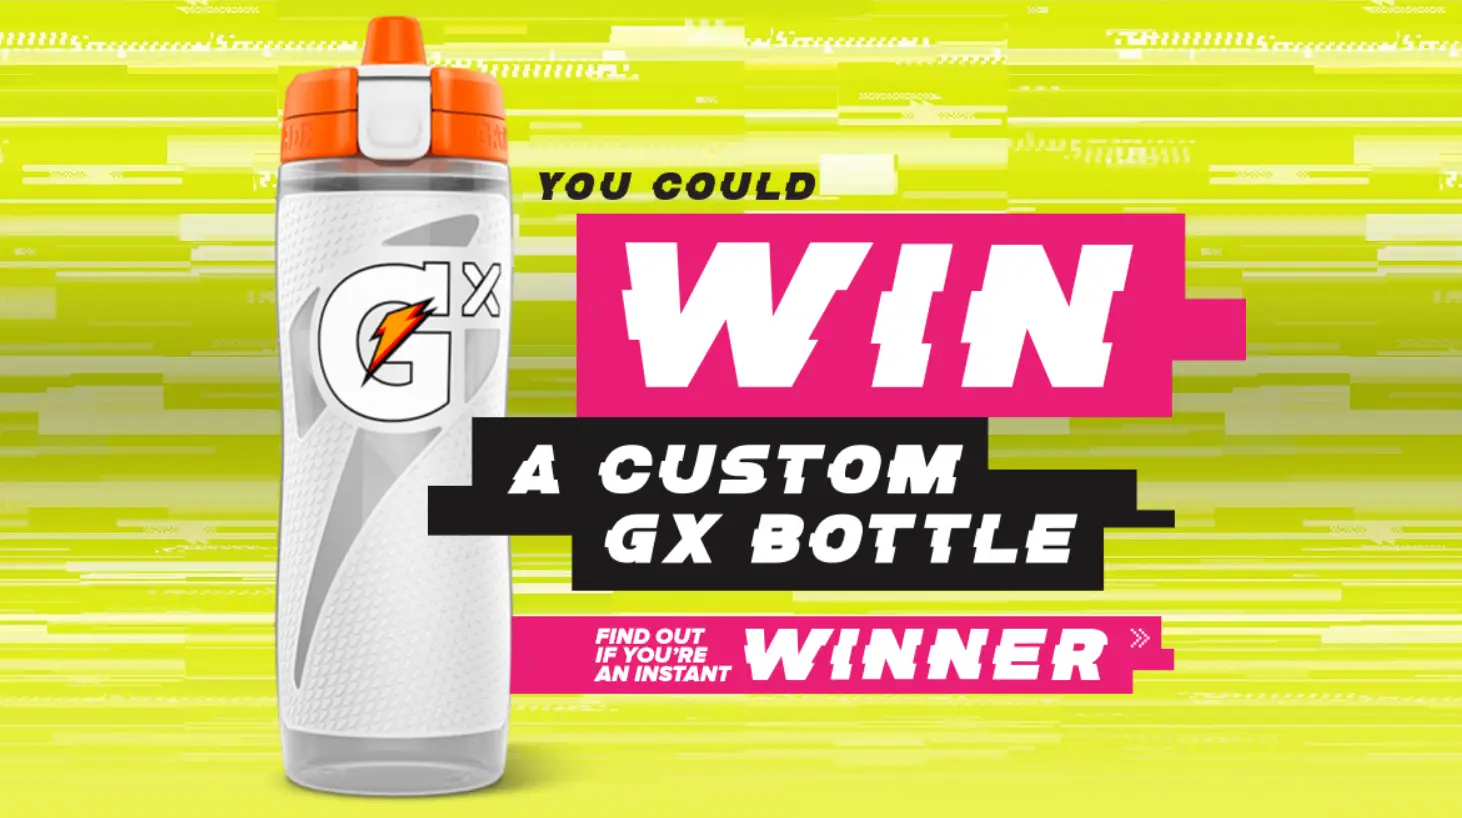 Gatorade is giving away 50 prizes each day in their Gatorade Custom Gx Bottle Instant Win Game.